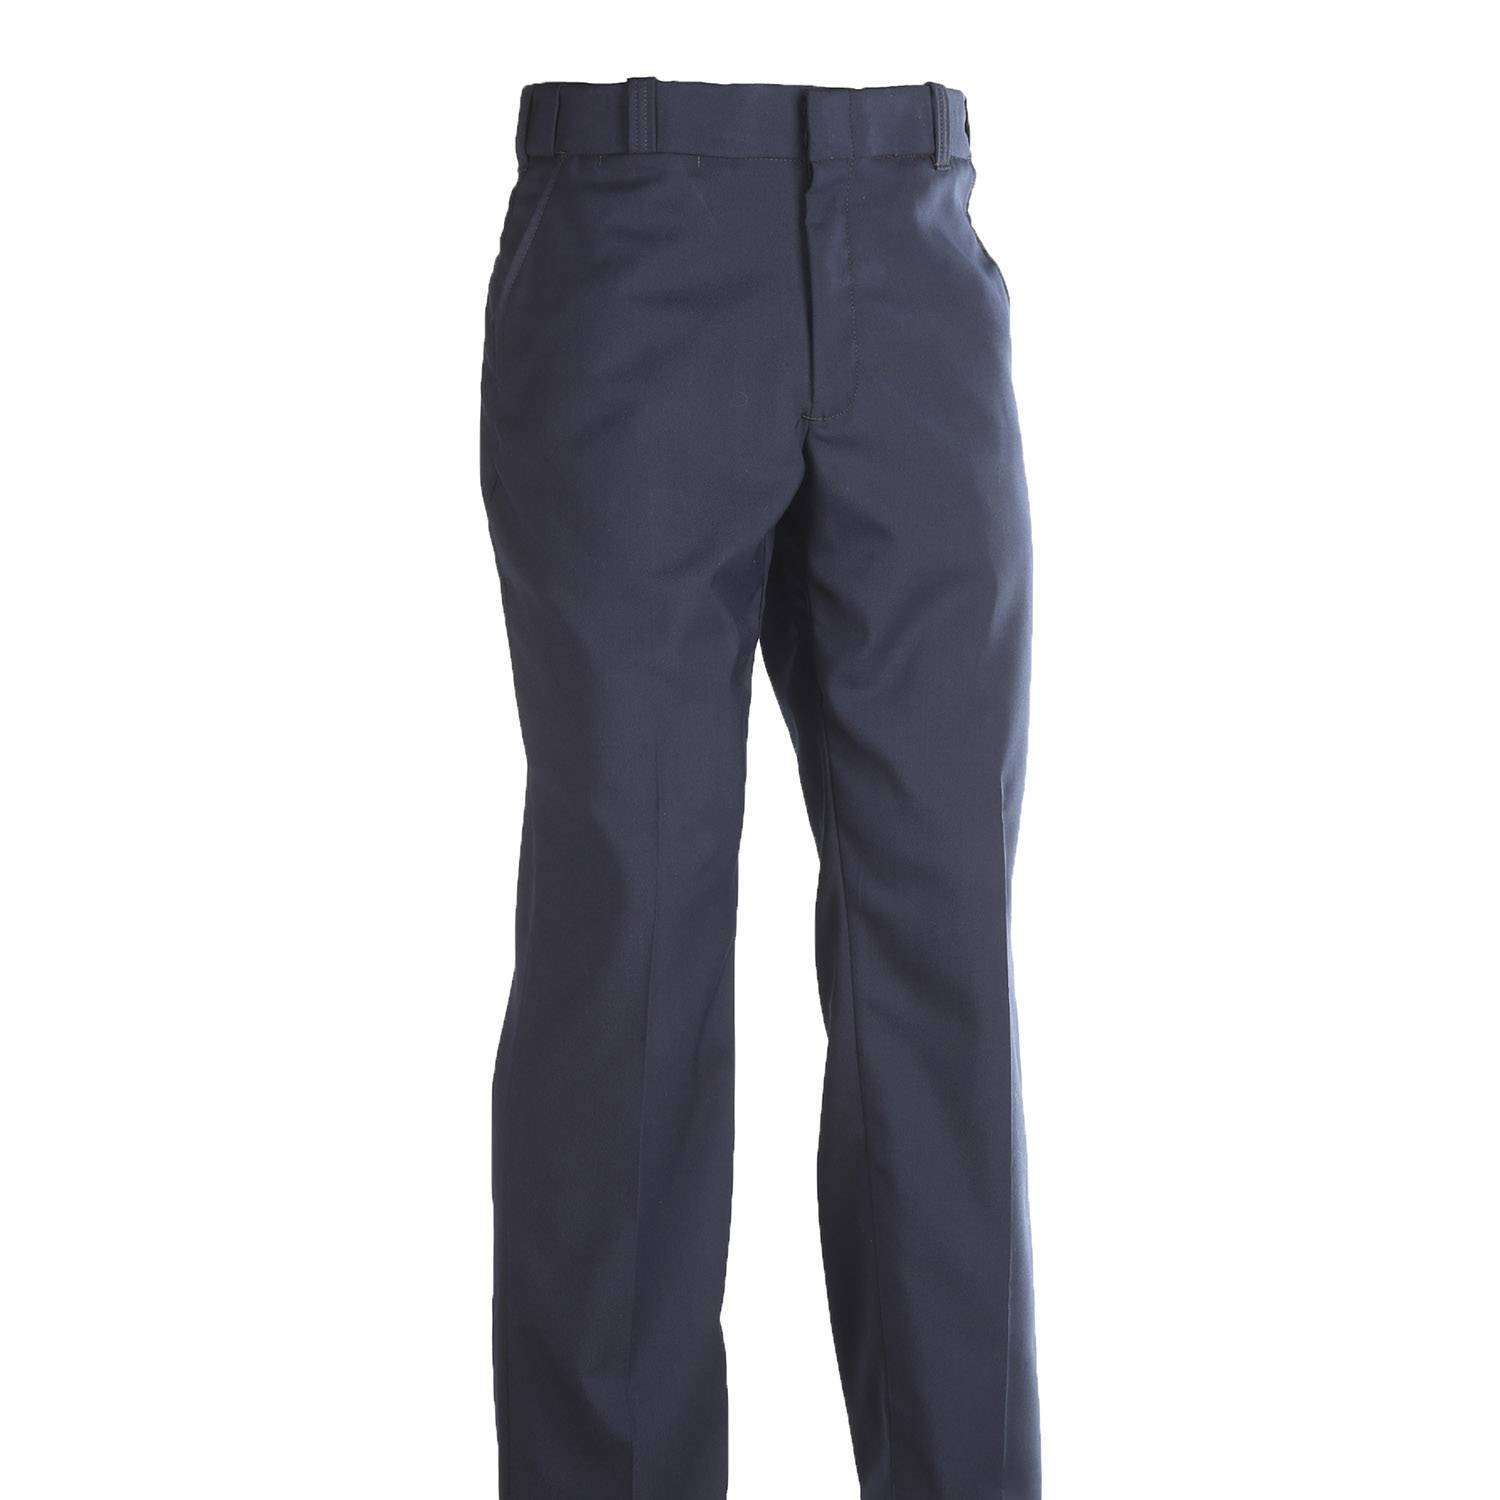 Horace Small New Generation Plus 4 Pocket Trouser